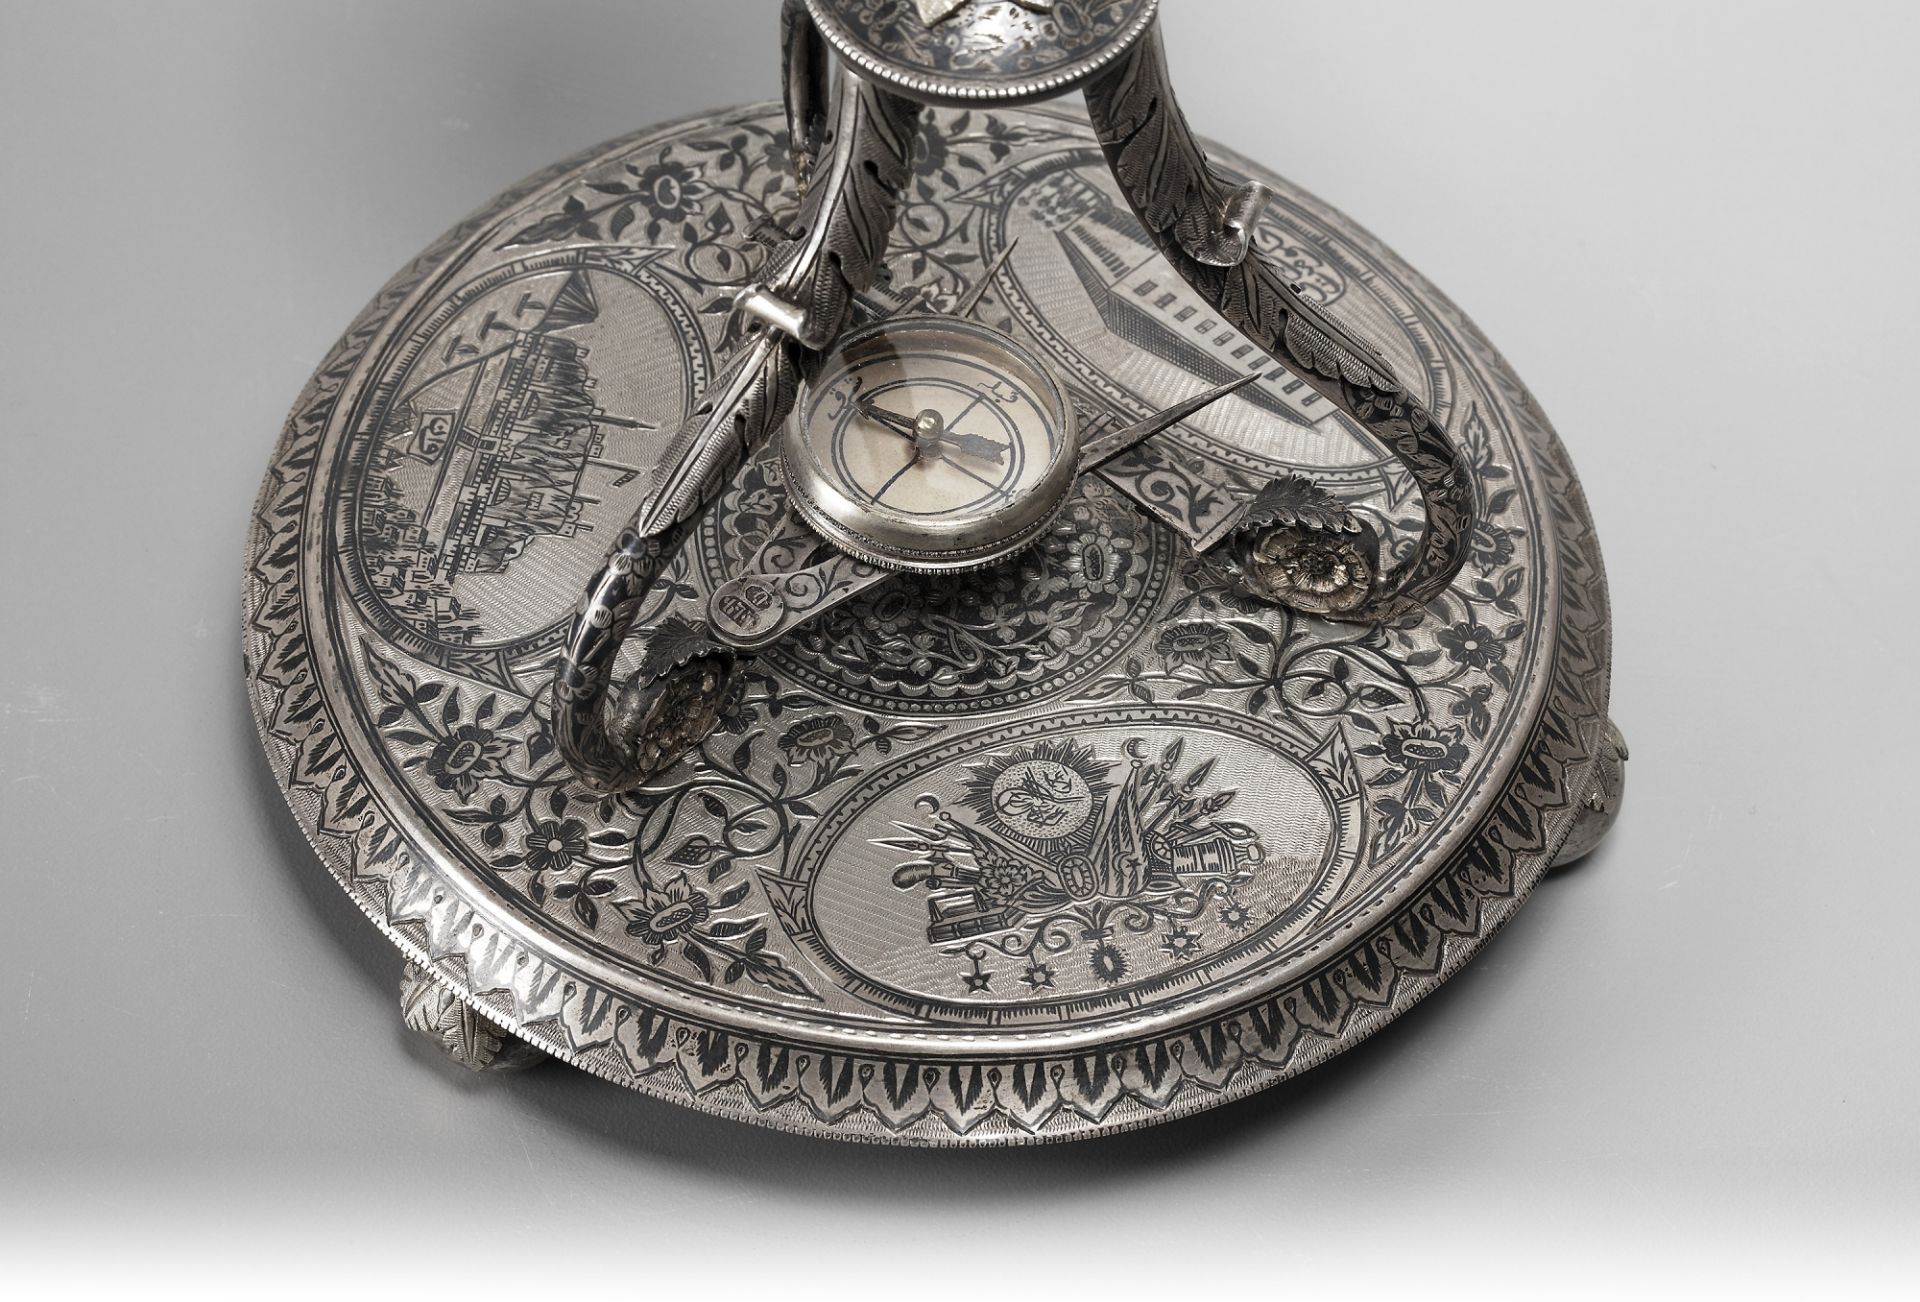 AN OTTOMAN SILVER, NIELLOED AND ENGRAVED GLOBE CLOCK BEARING THE TUGHRA OF SULTAN ABDULHAMID II TURK - Image 8 of 9